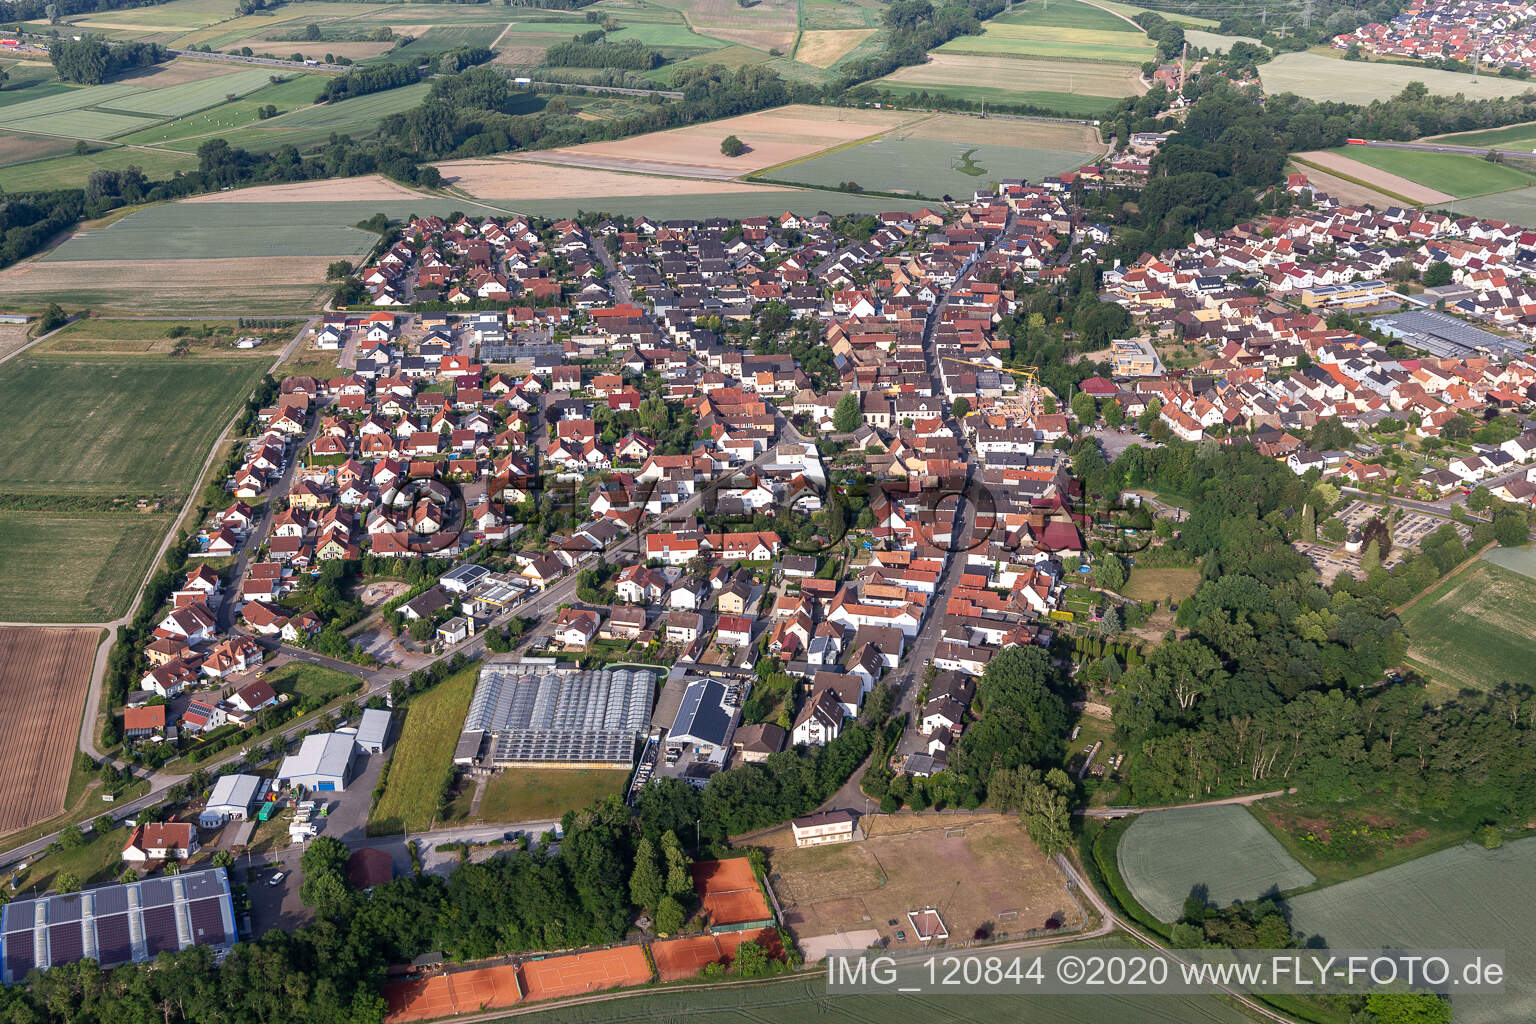 Drone image of Kuhardt in the state Rhineland-Palatinate, Germany